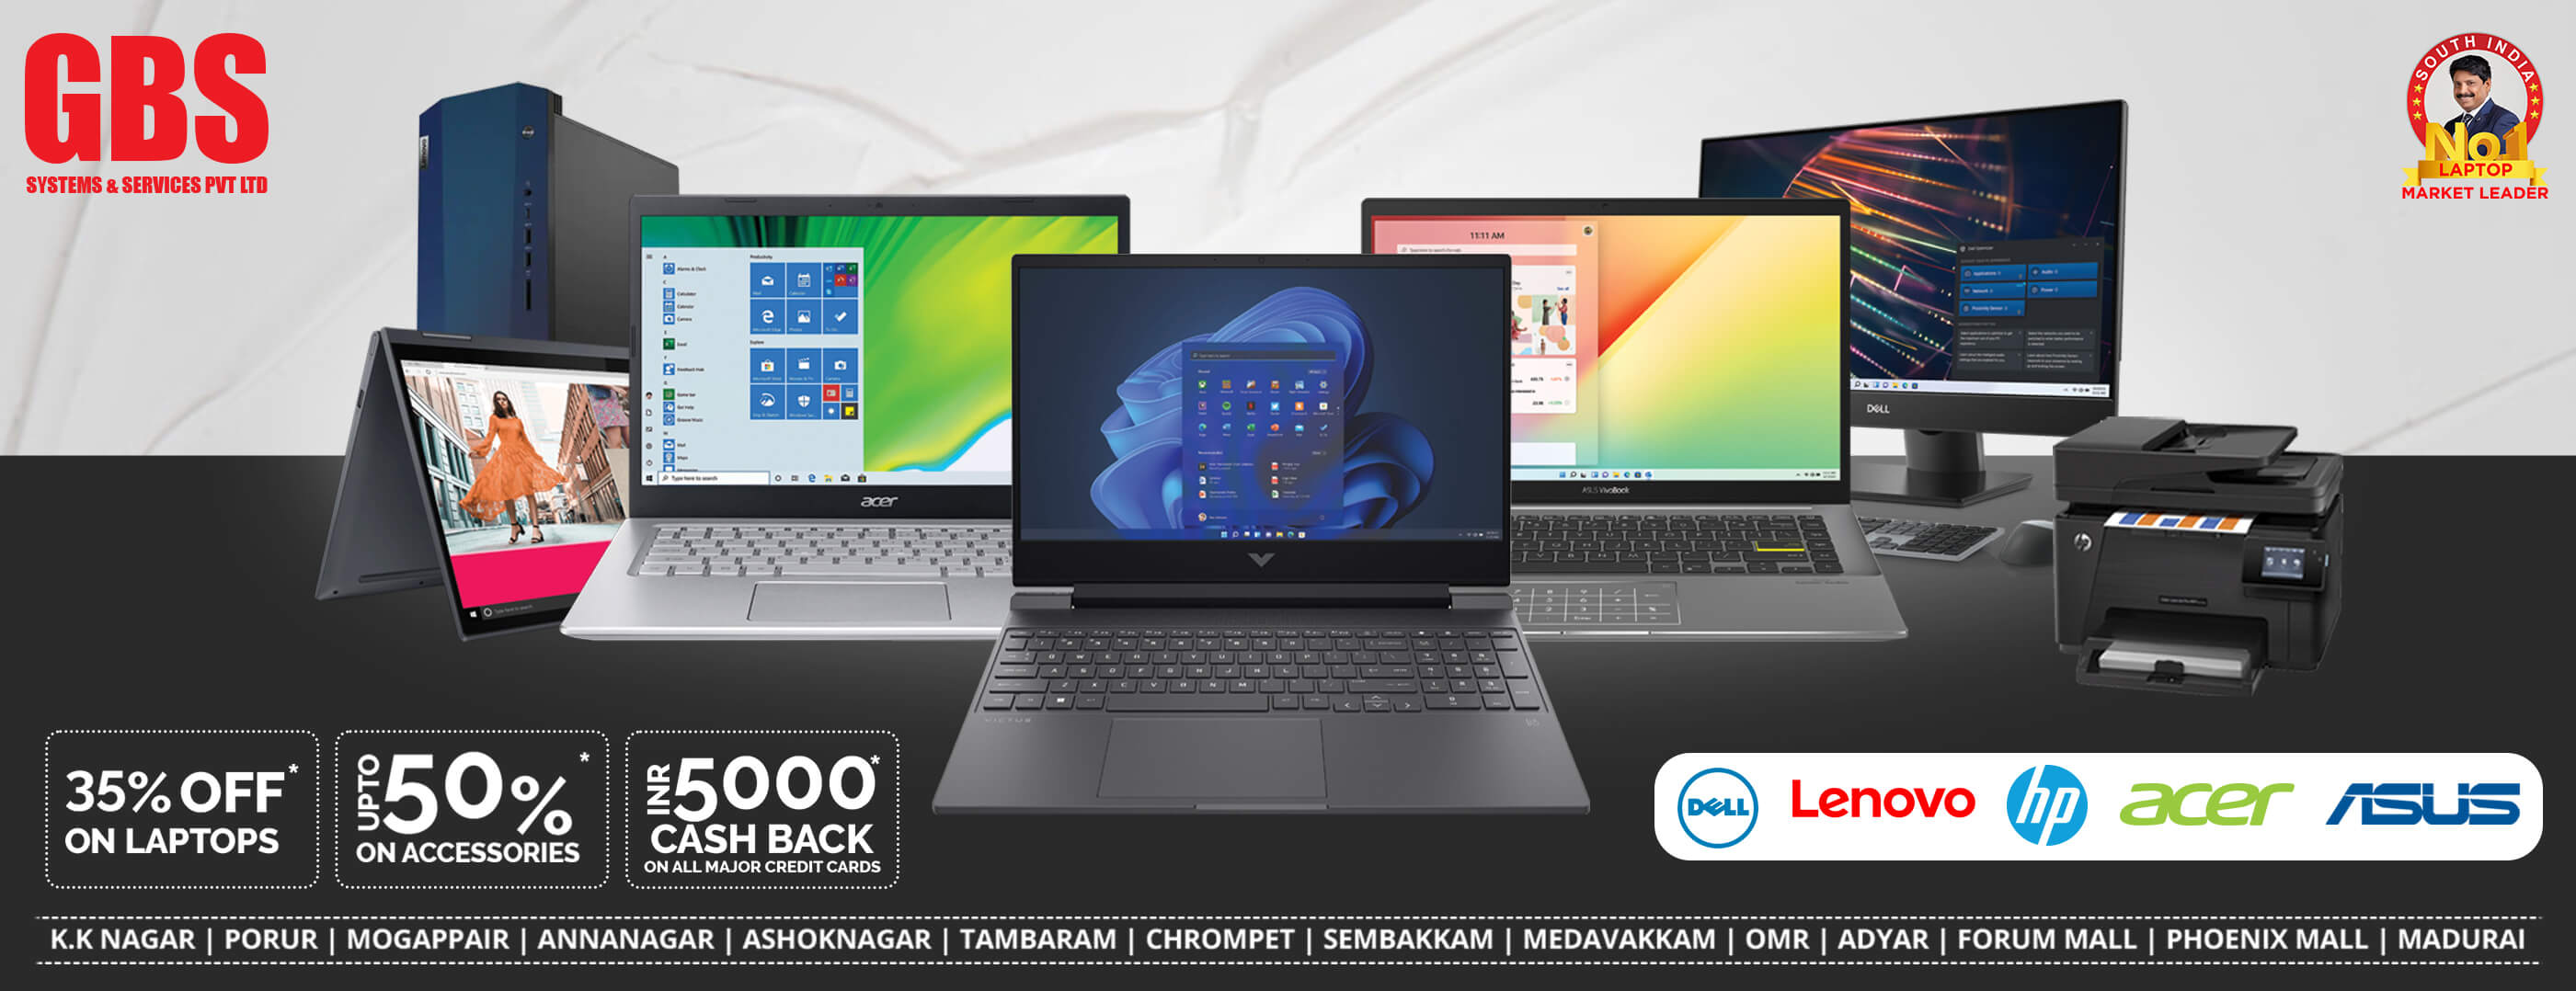 All Brand laptop showroom in chennai